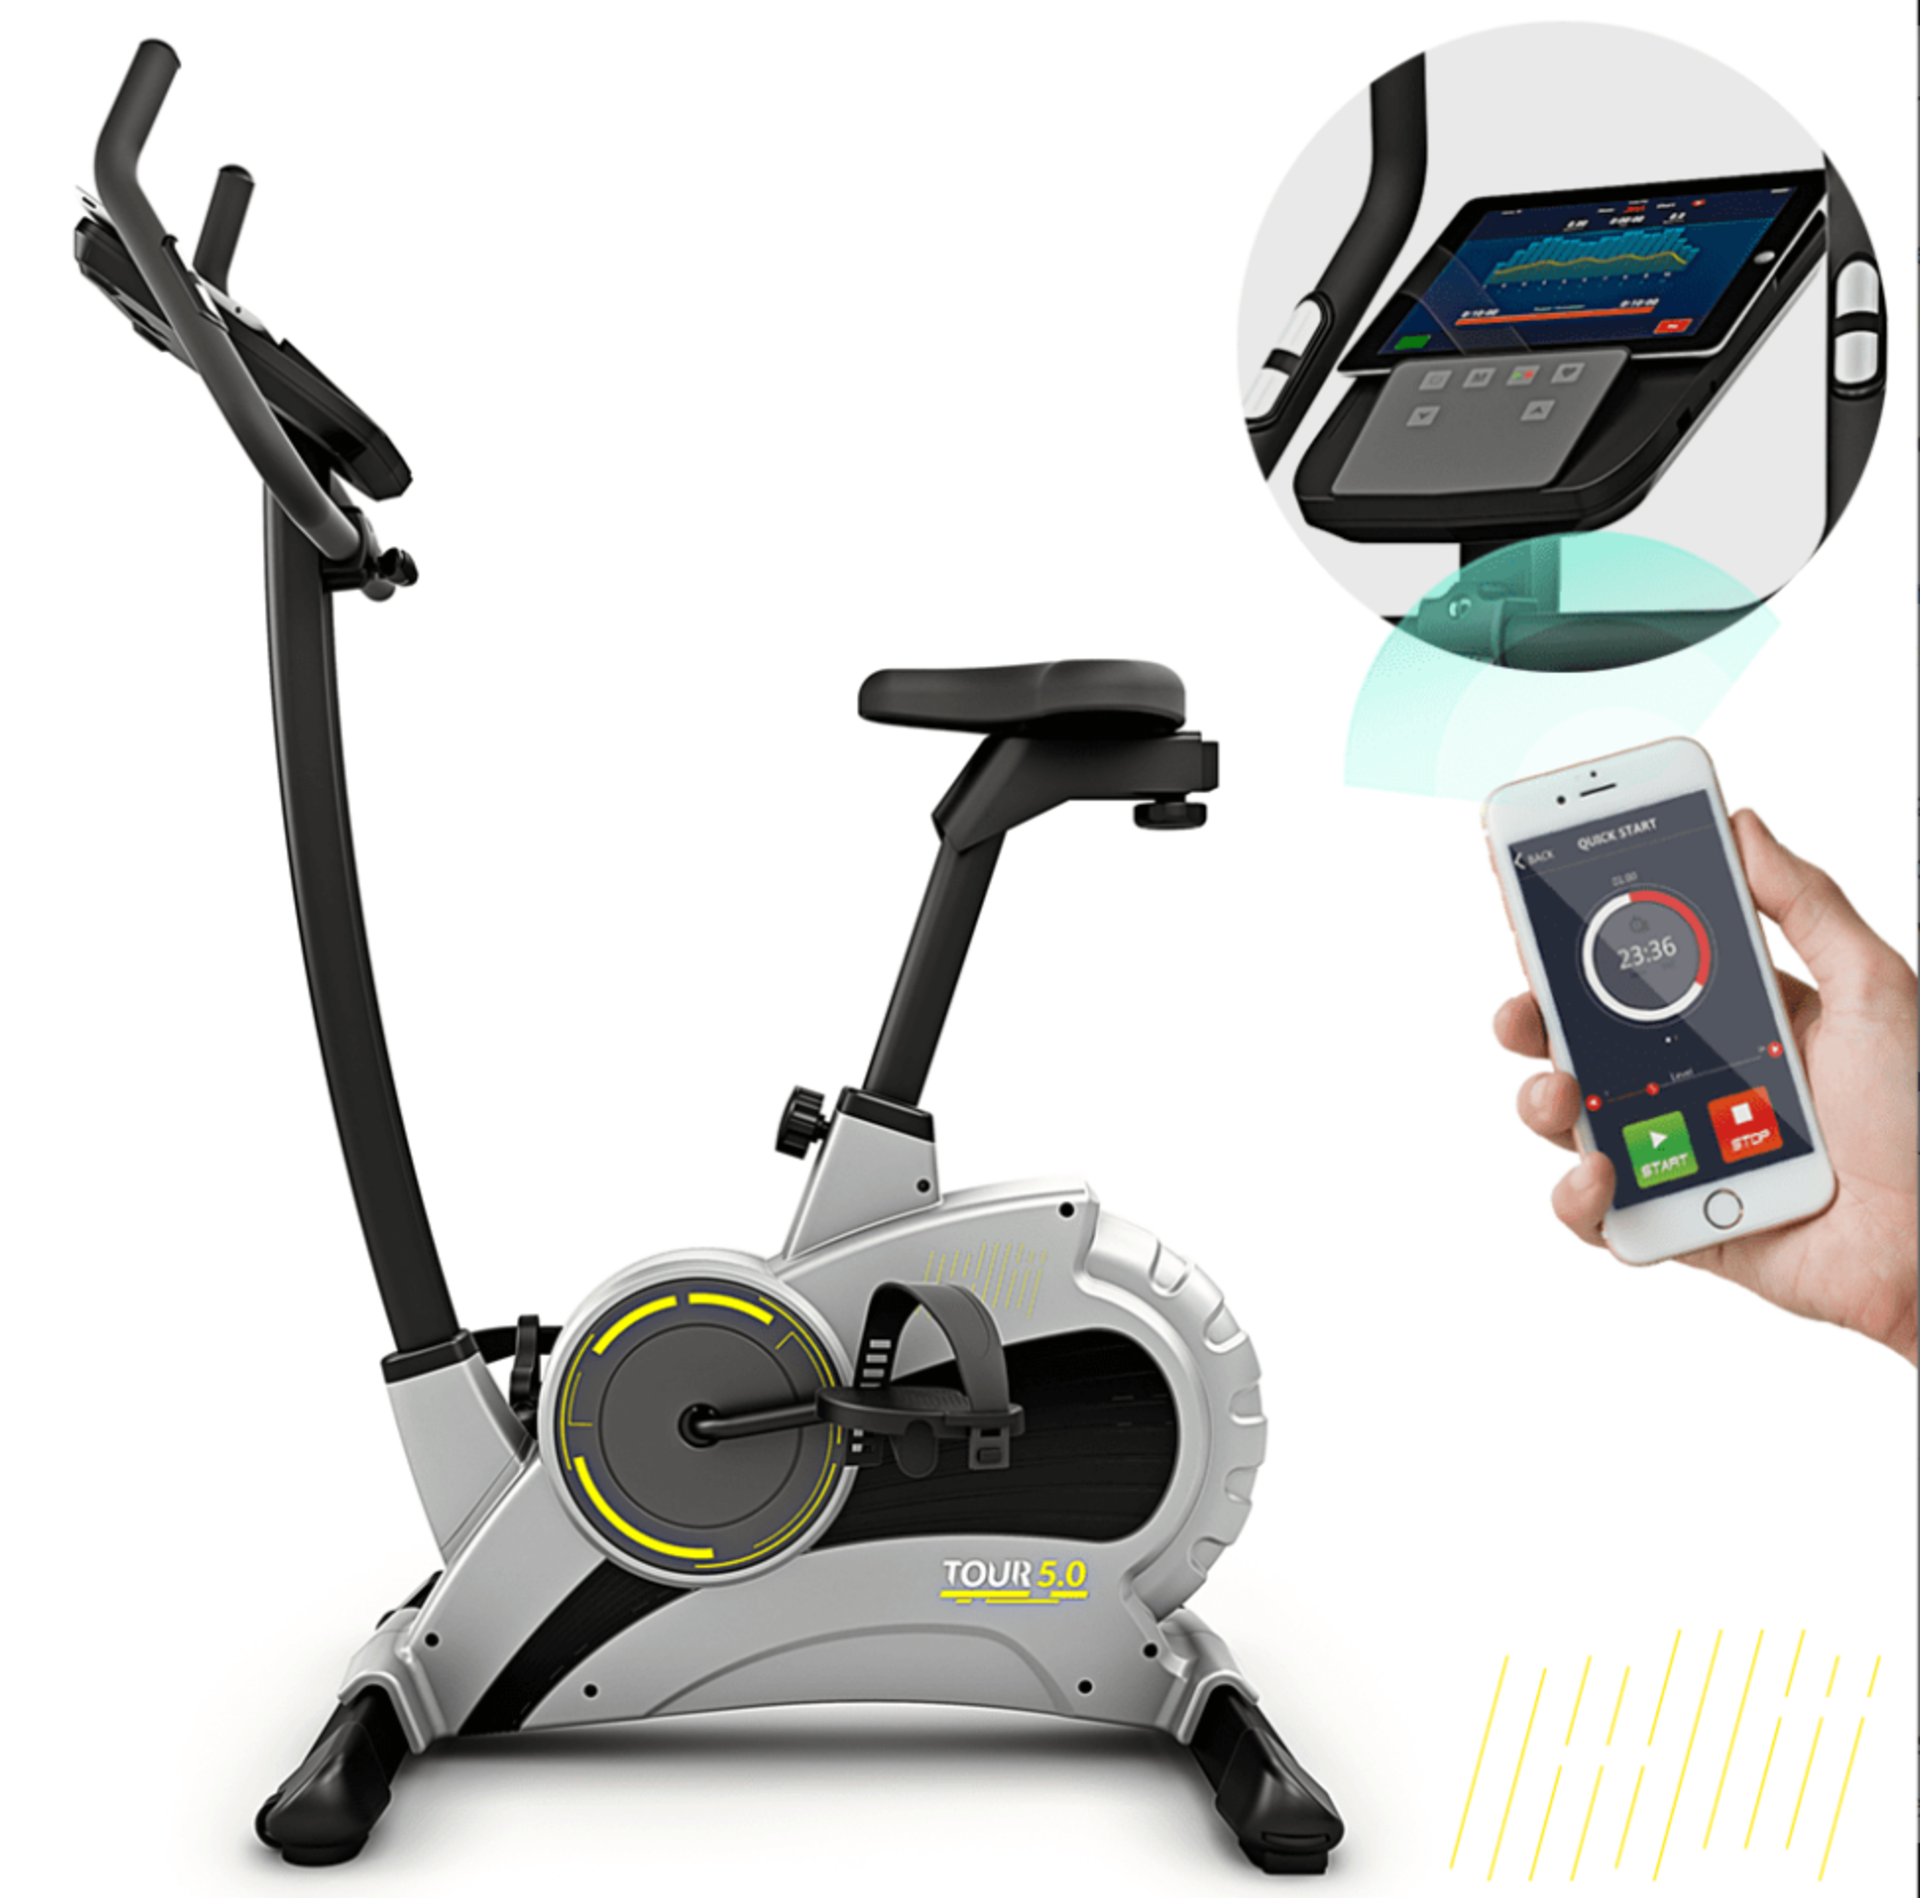 Bluefin Fitness Tour 5.0 Resistance Exercise Bike RRP “?349.00